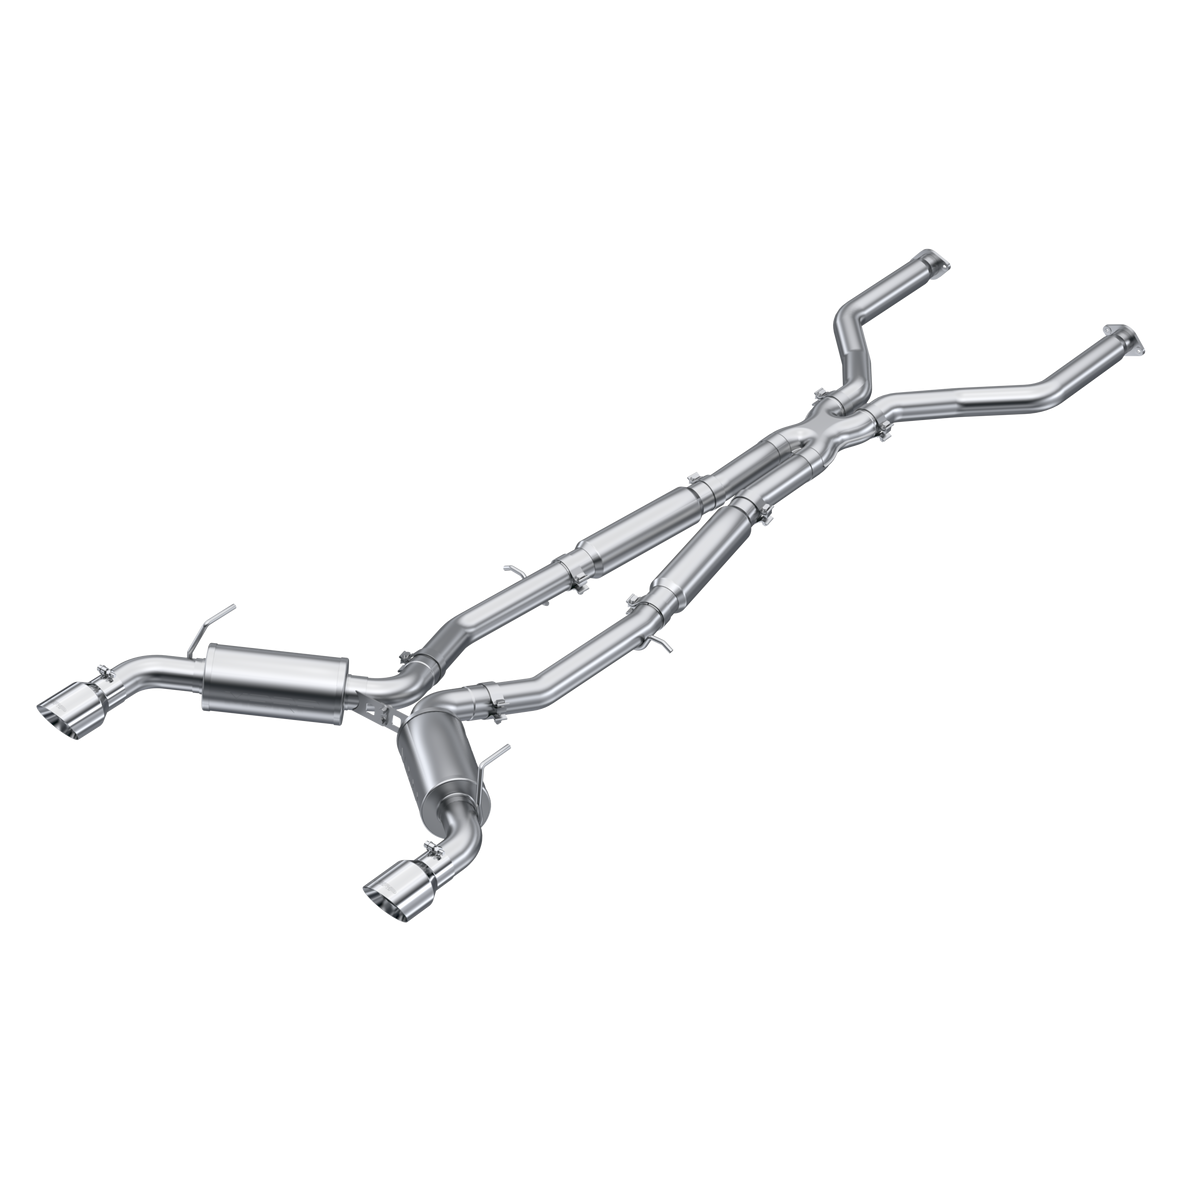 MBRP Pro Series 3" Cat-Back Exhaust System, Dual Rear Exit w/ 4.5" Stainless Steel Tips, Resonated - Infiniti Q50 3.0L RWD / AWD VR30DDTT